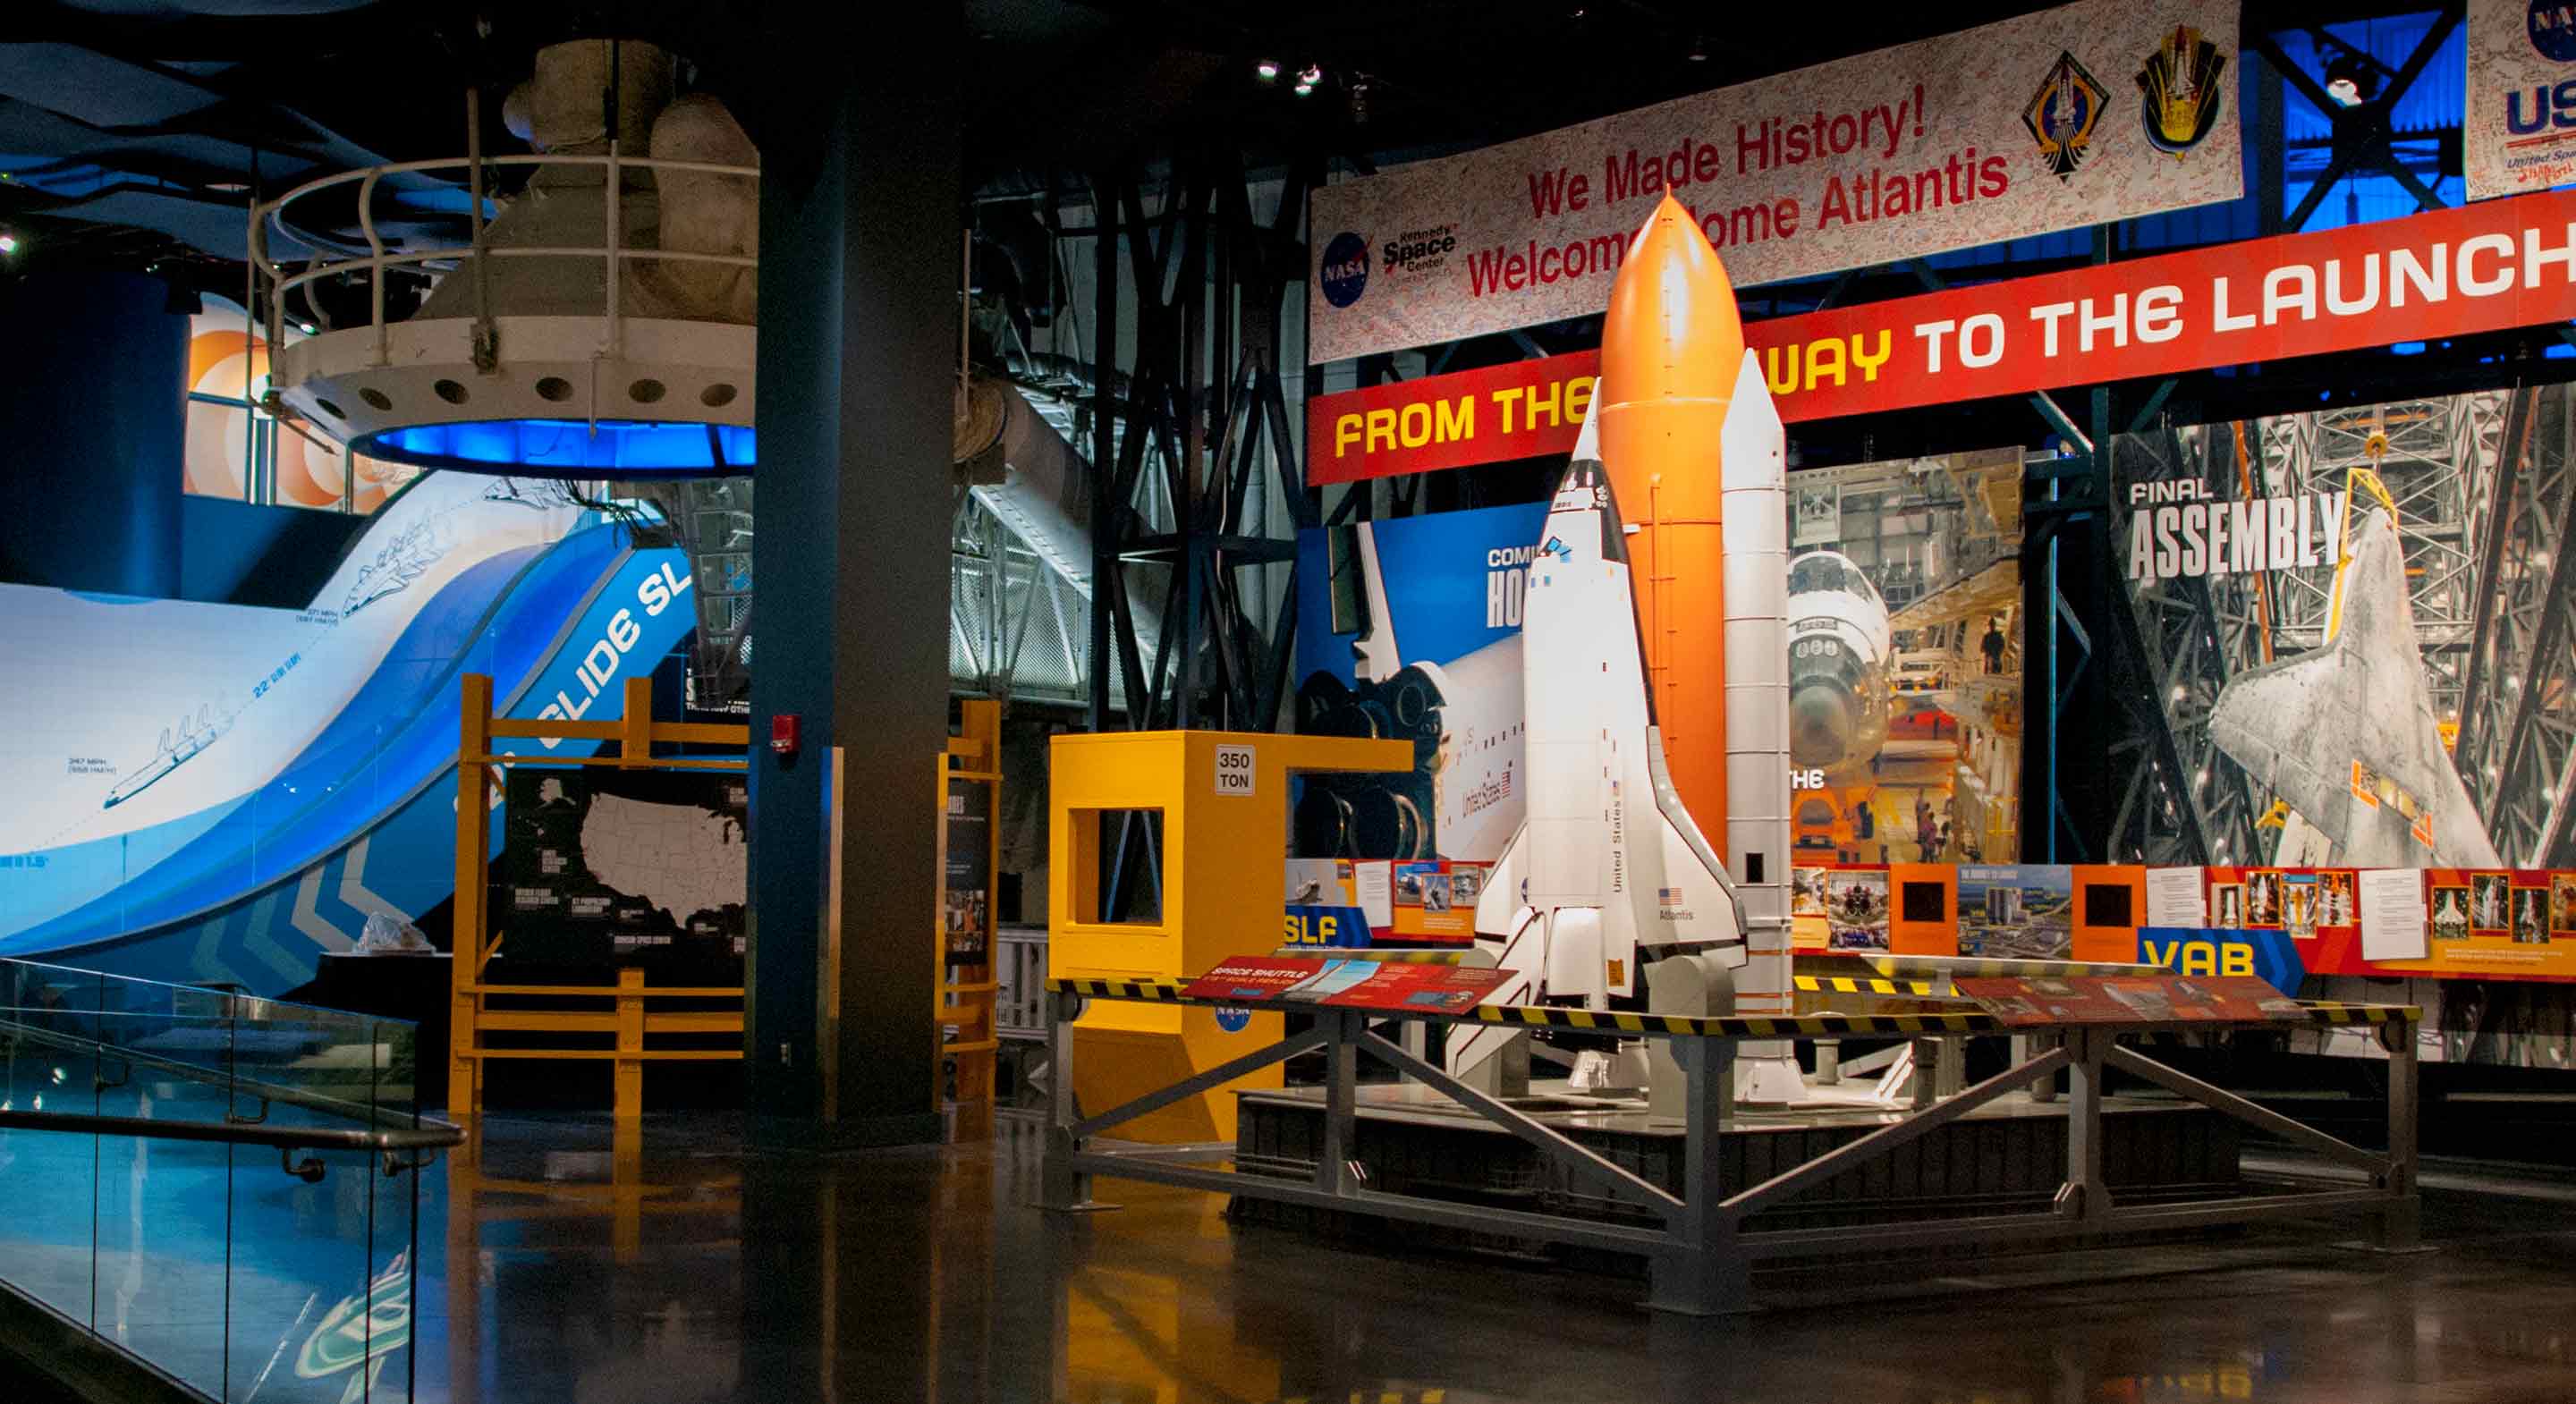 Kennedy-Space-Center-Visitor_Space-Shuttle-Atlantis_5